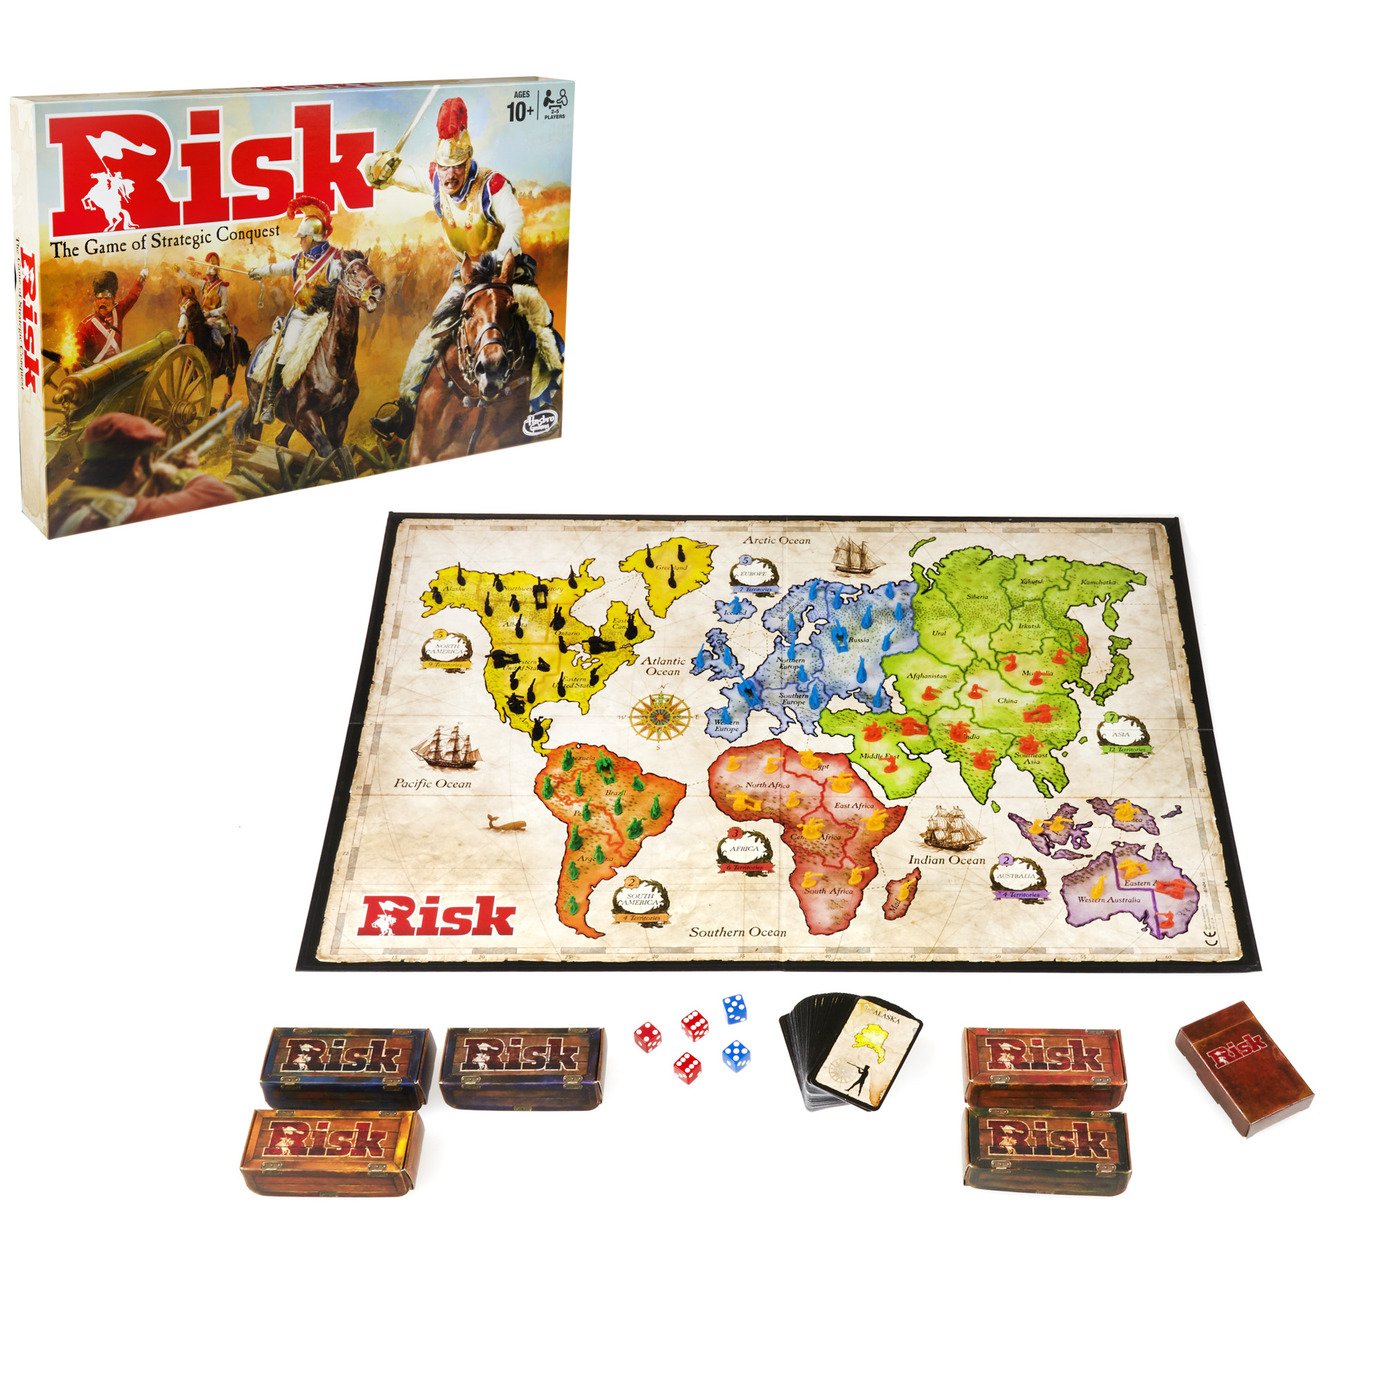 Risk Board Game, Strategy Game for Children Review